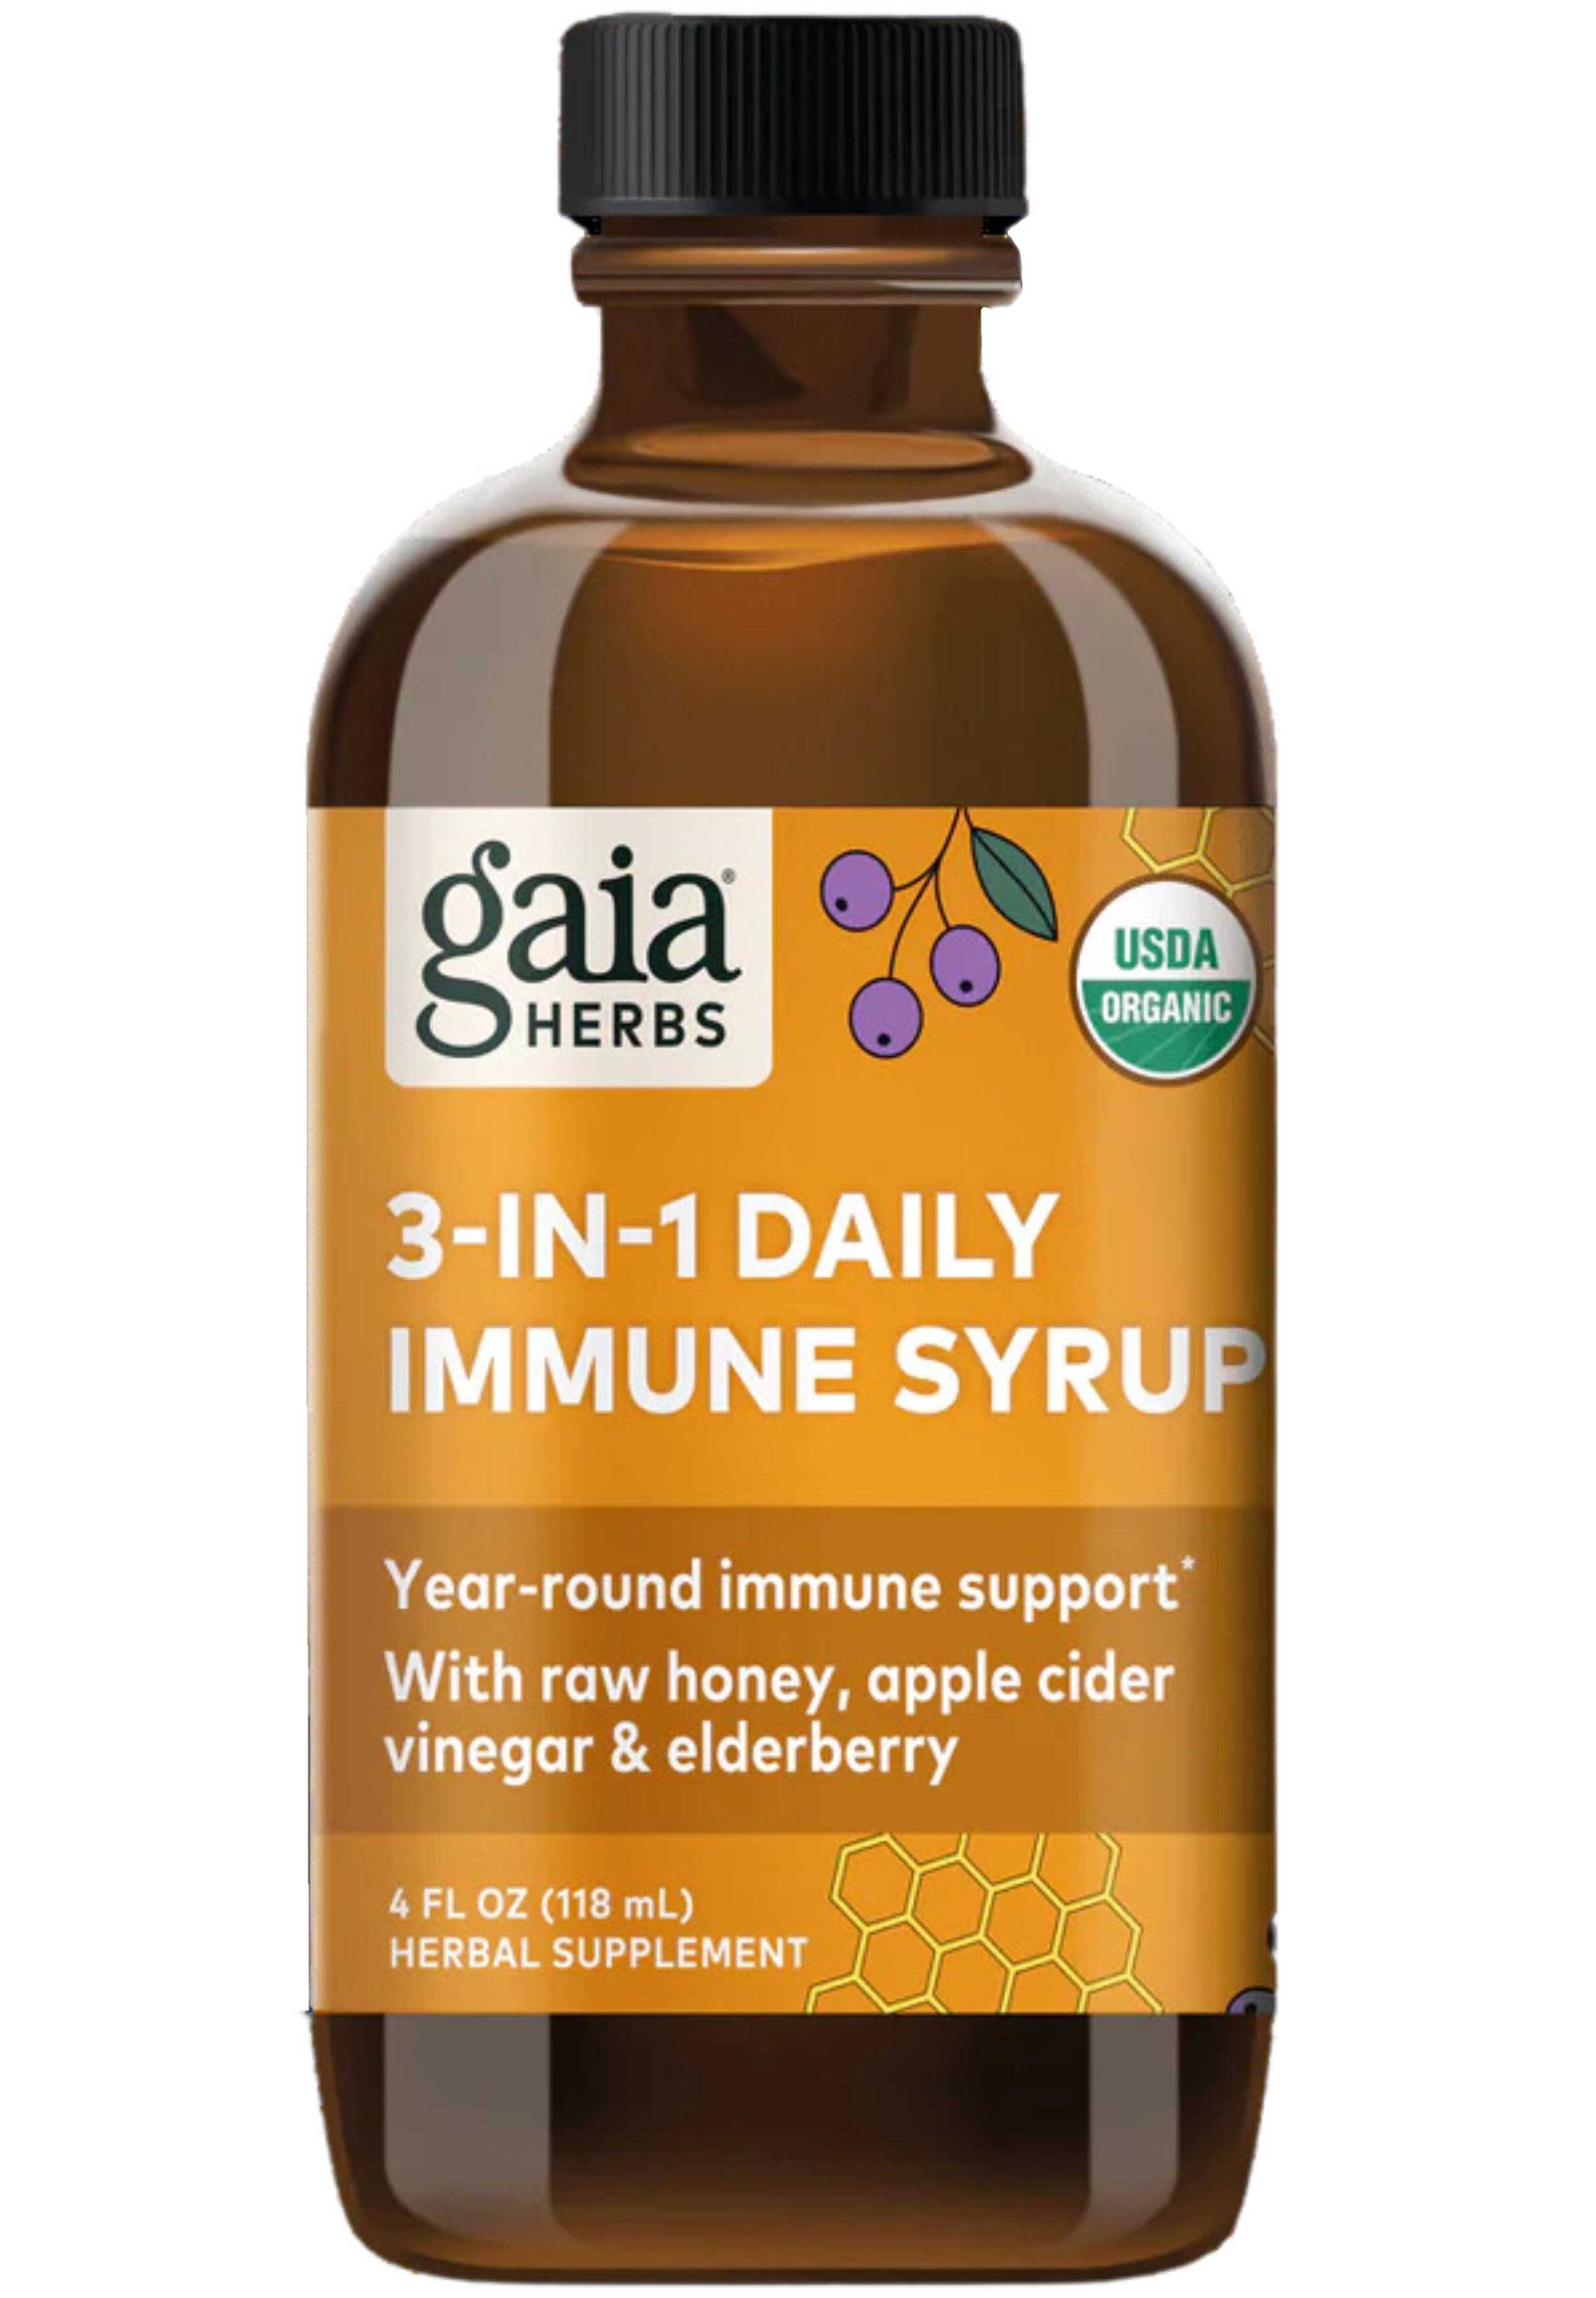 Gaia Herbs Black 3-IN-1 Daily Immune Syrup (Formerly Elderberry Tonic)